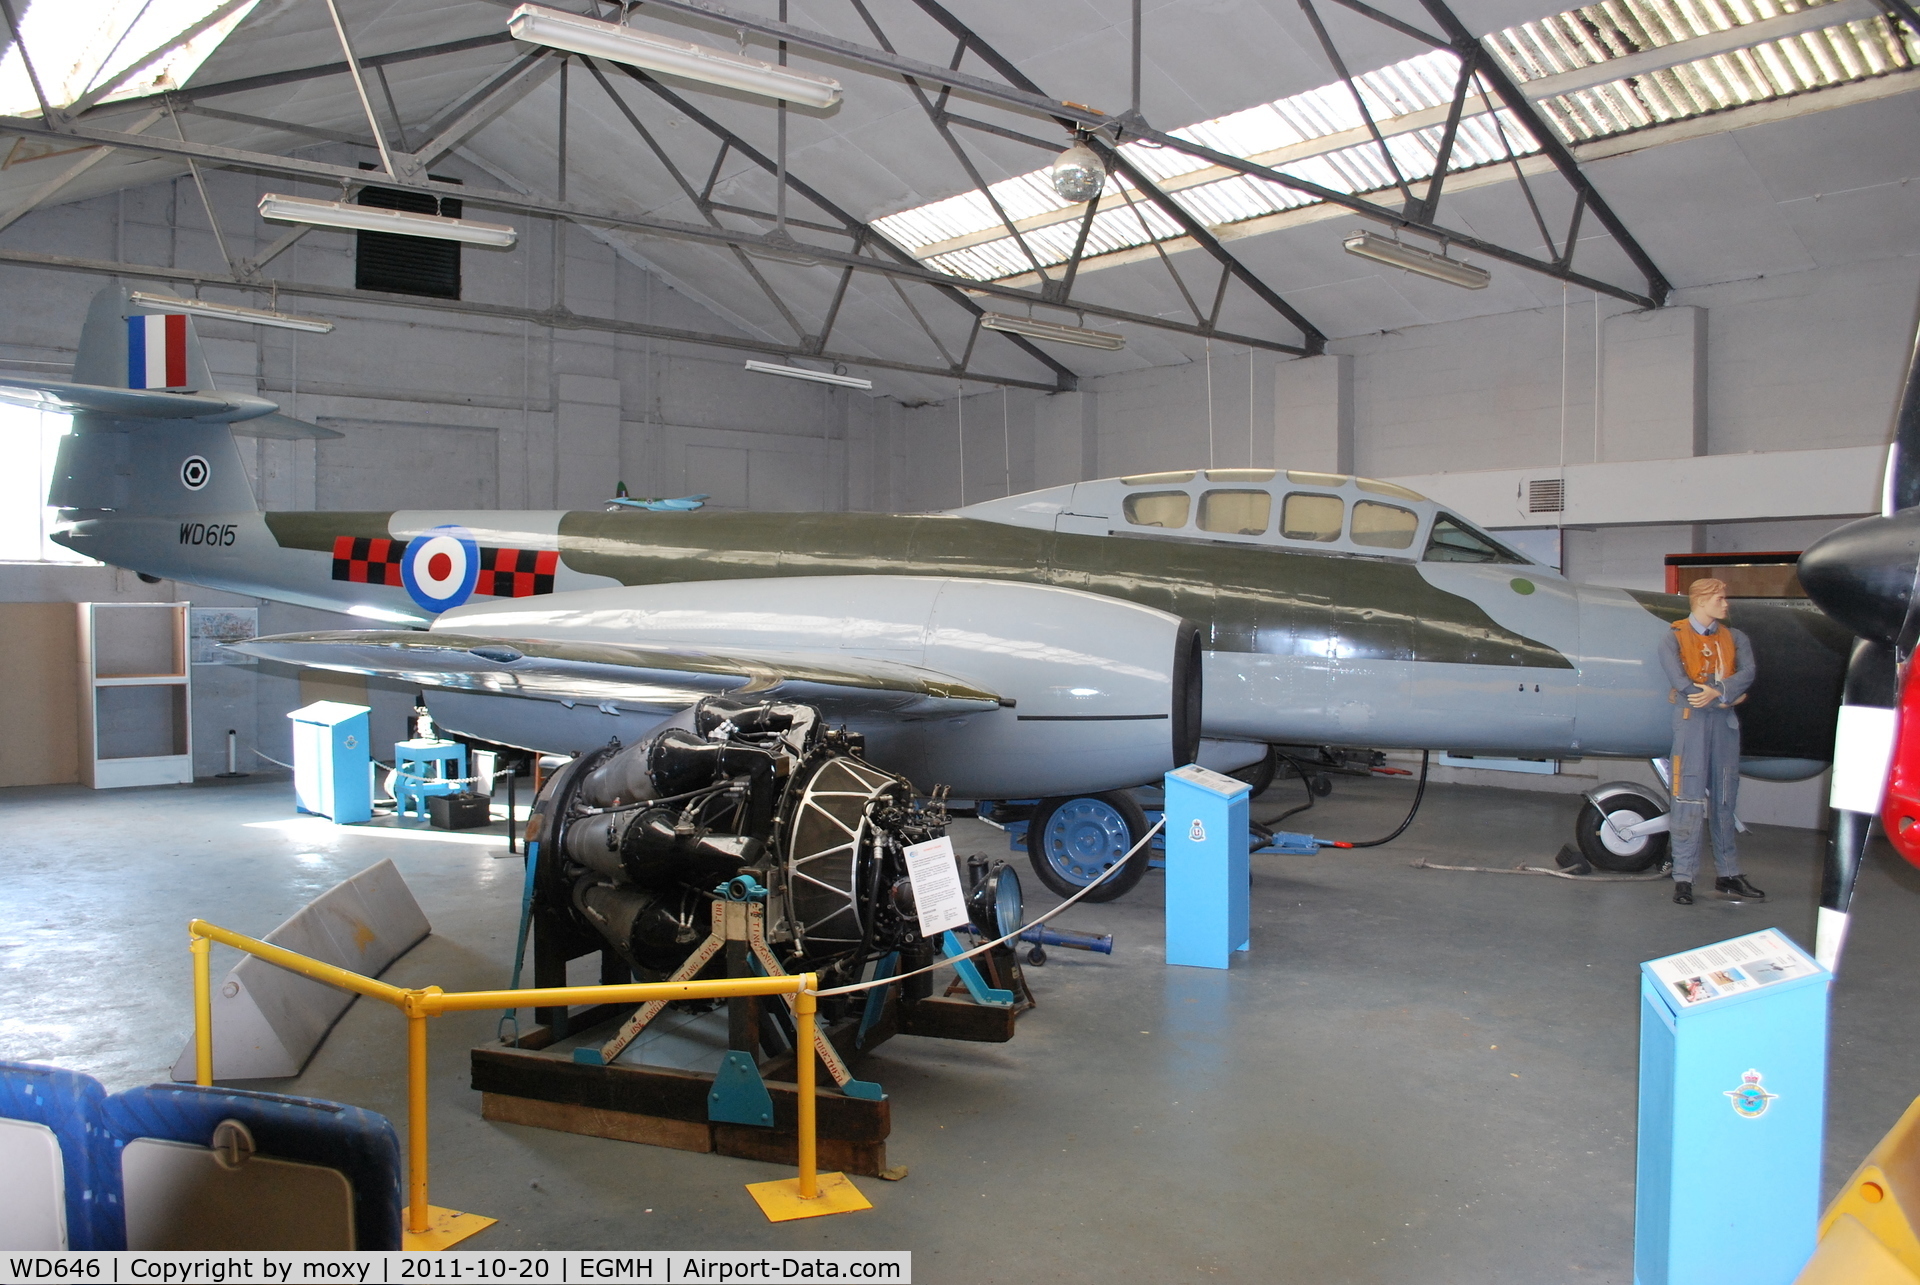 WD646, 1951 Gloster Meteor TT.20 C/N Not found WD646, Smart Meteor TT.20 marked as WD615 at the history of Manston museum